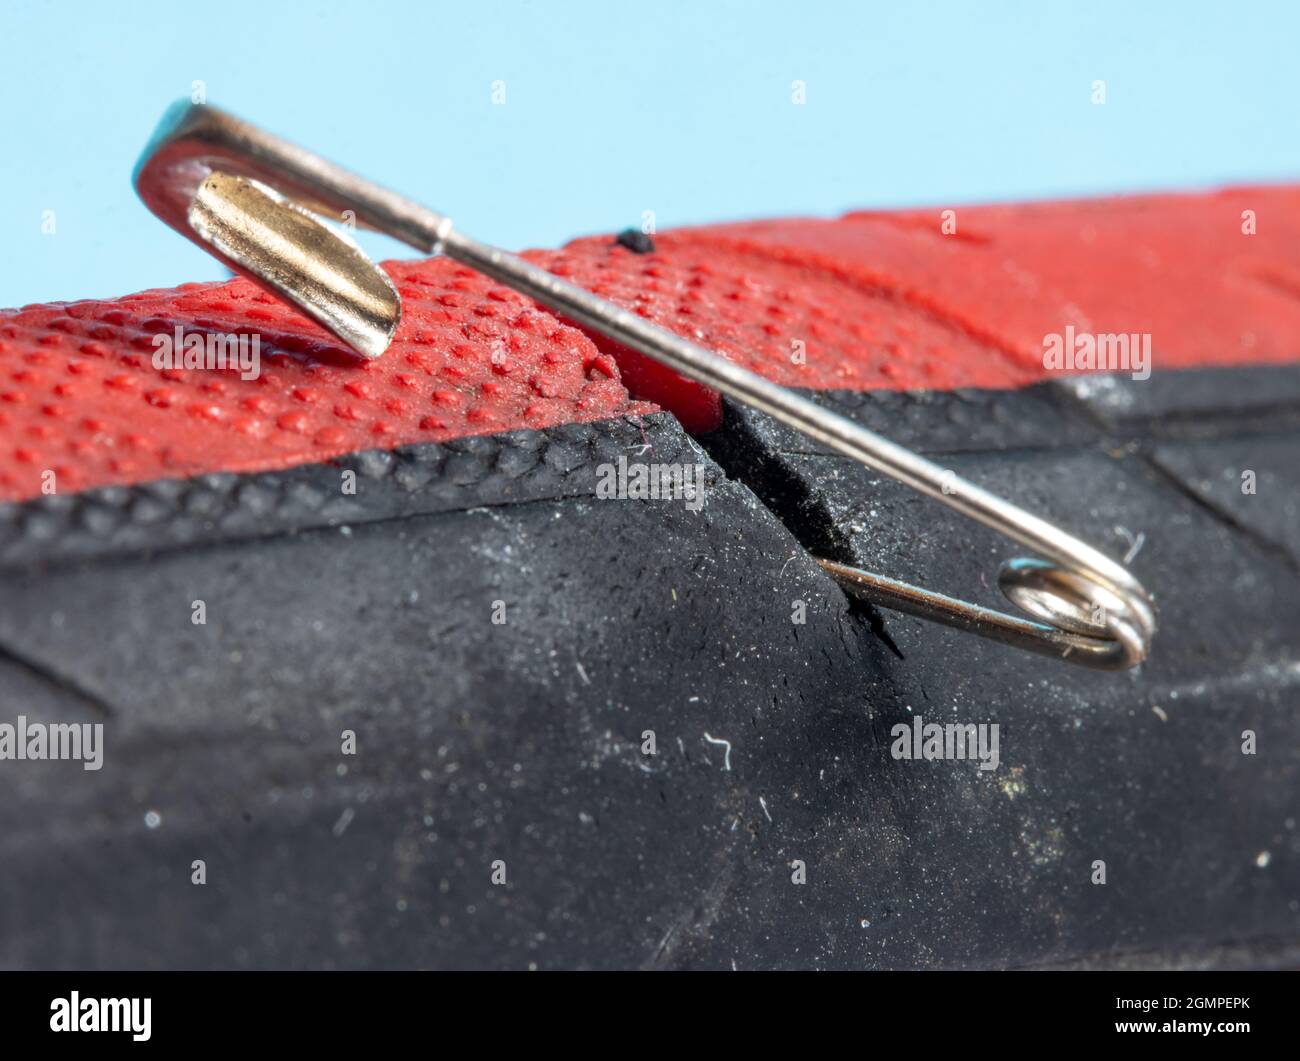 The bicycle tire is damaged by a safety pin, close up view. Stock Photo